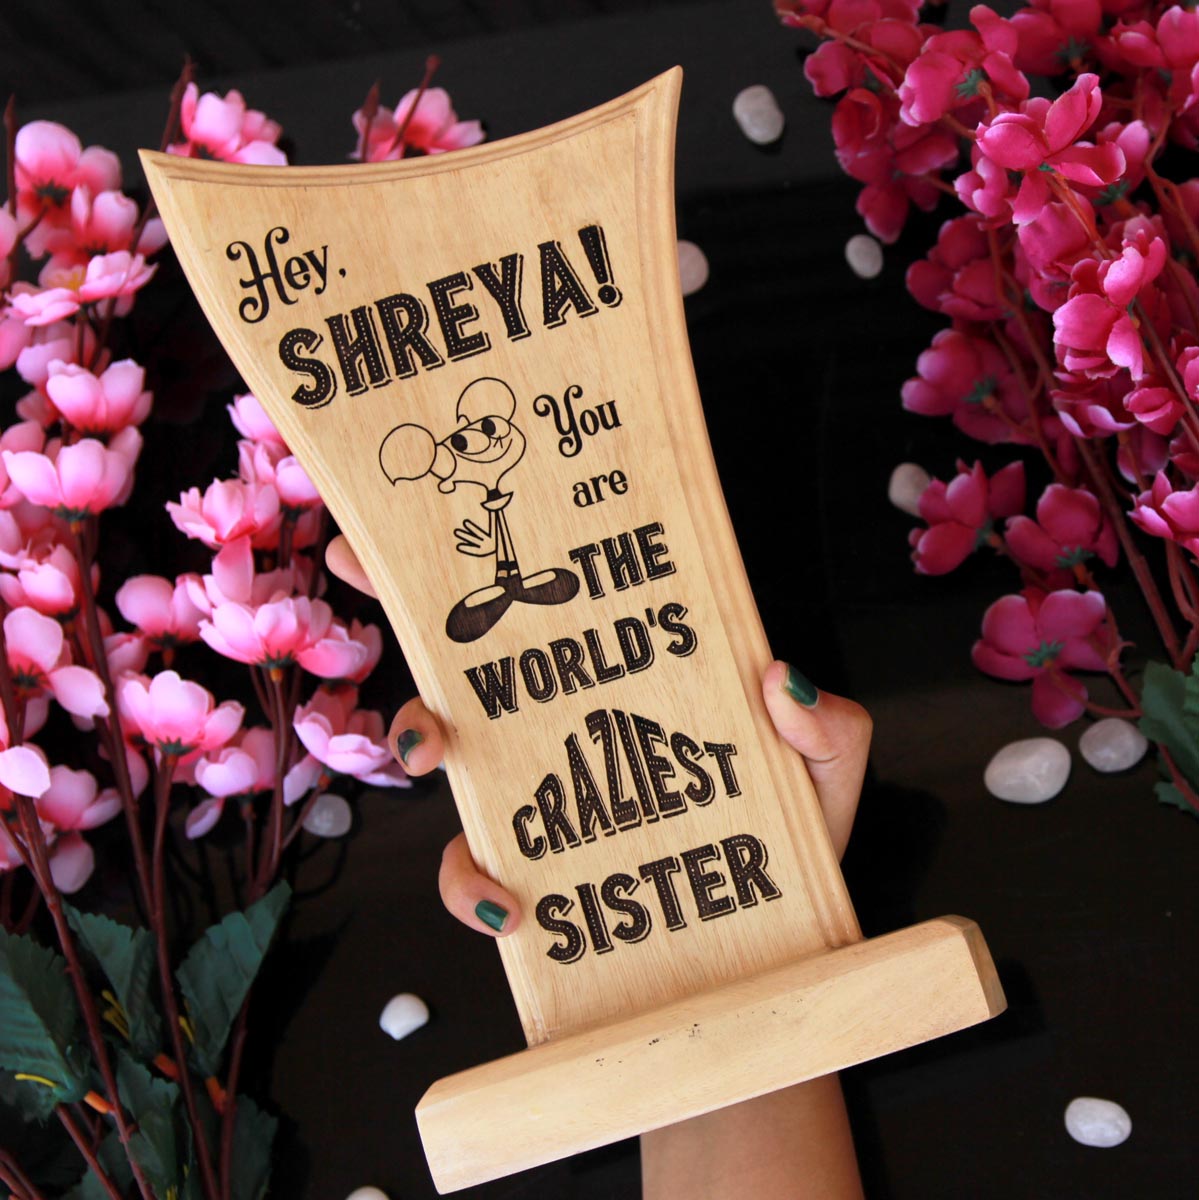 World's Craziest Sister Wooden Award Standee. This Wooden Trophy Award Is A Unique Gift For Raksha Bandhan. Buy More Personalized Online Gifts For Sisters From The Woodgeek Store.